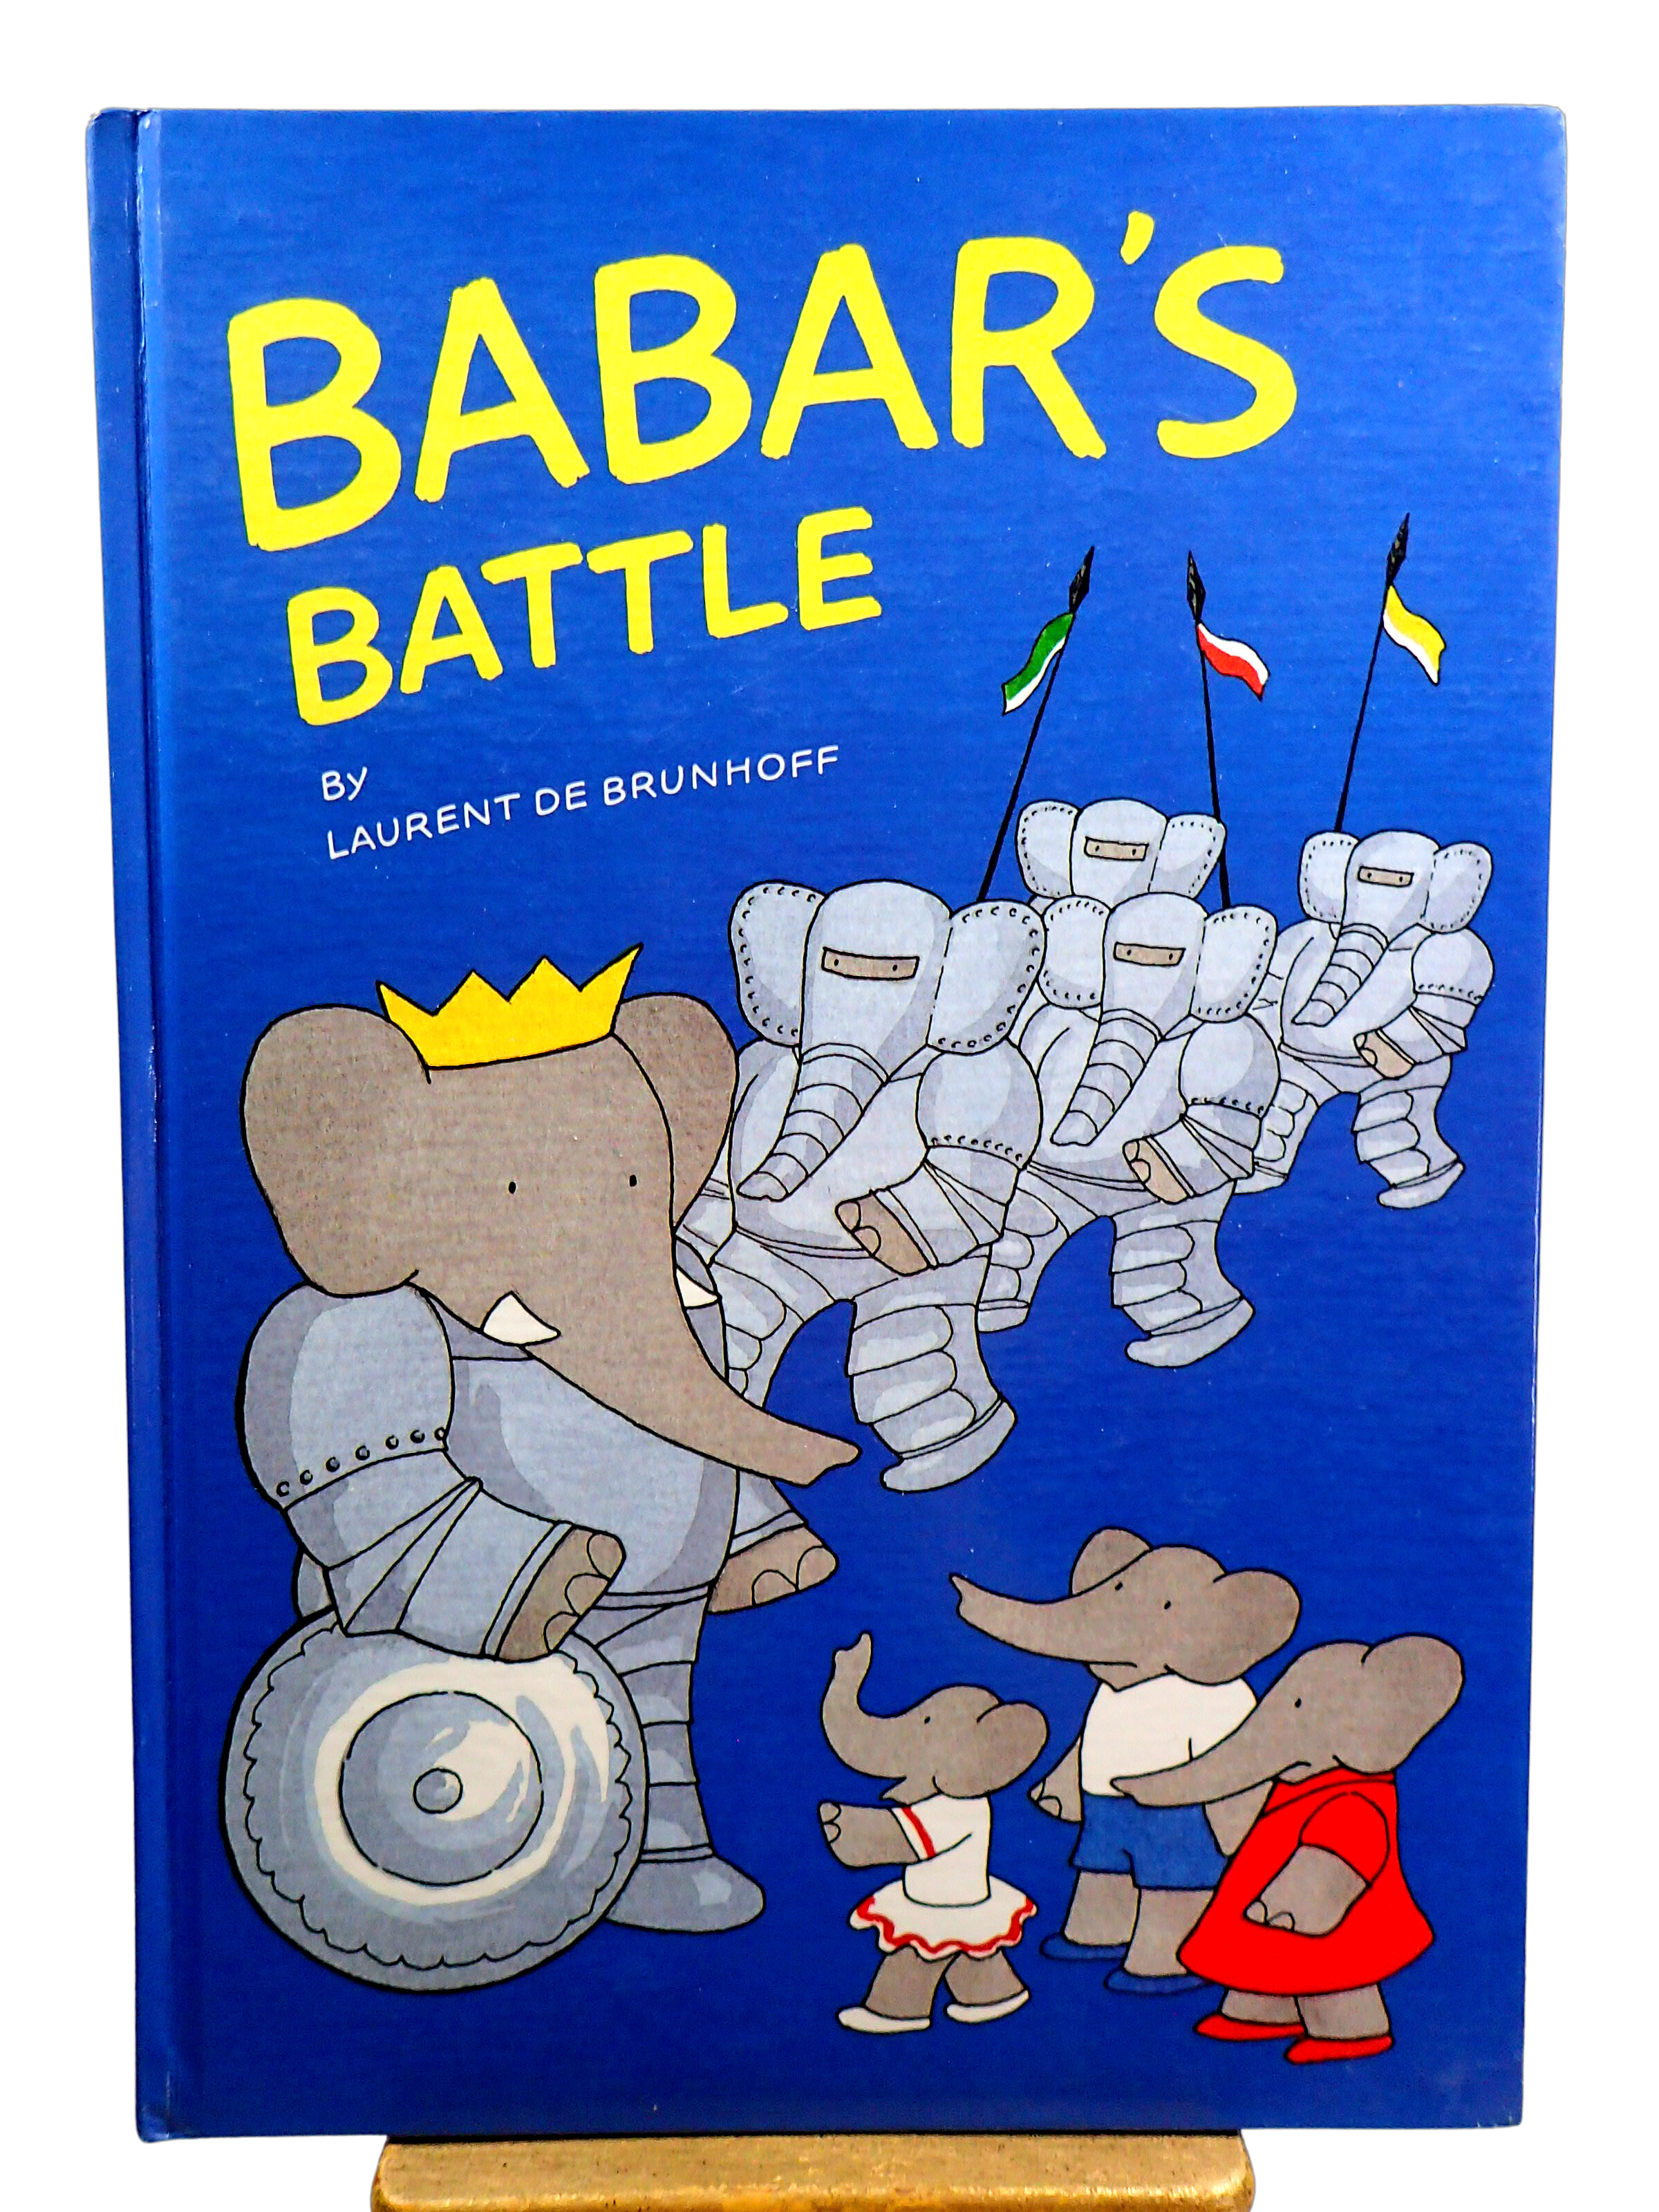 Classic　Brunhoff　Edition　–　First　Ch　Kittys　Battle　Babar's　Tales　US　Laurent　De　Vintage